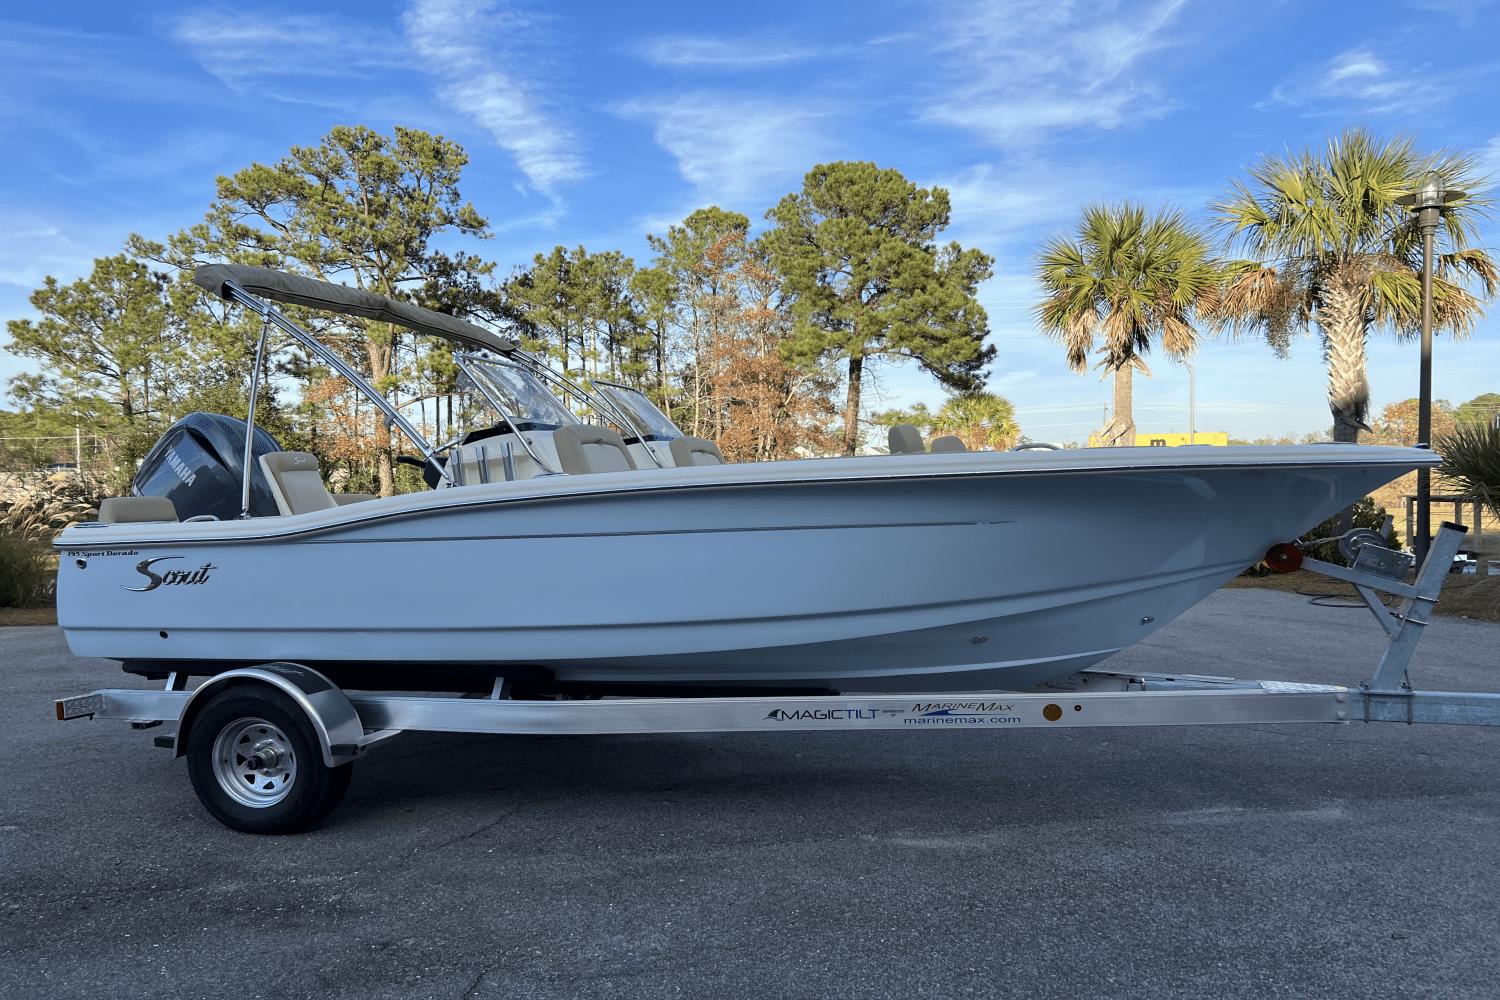 Outboard Fishing Boats For Sale From Scout